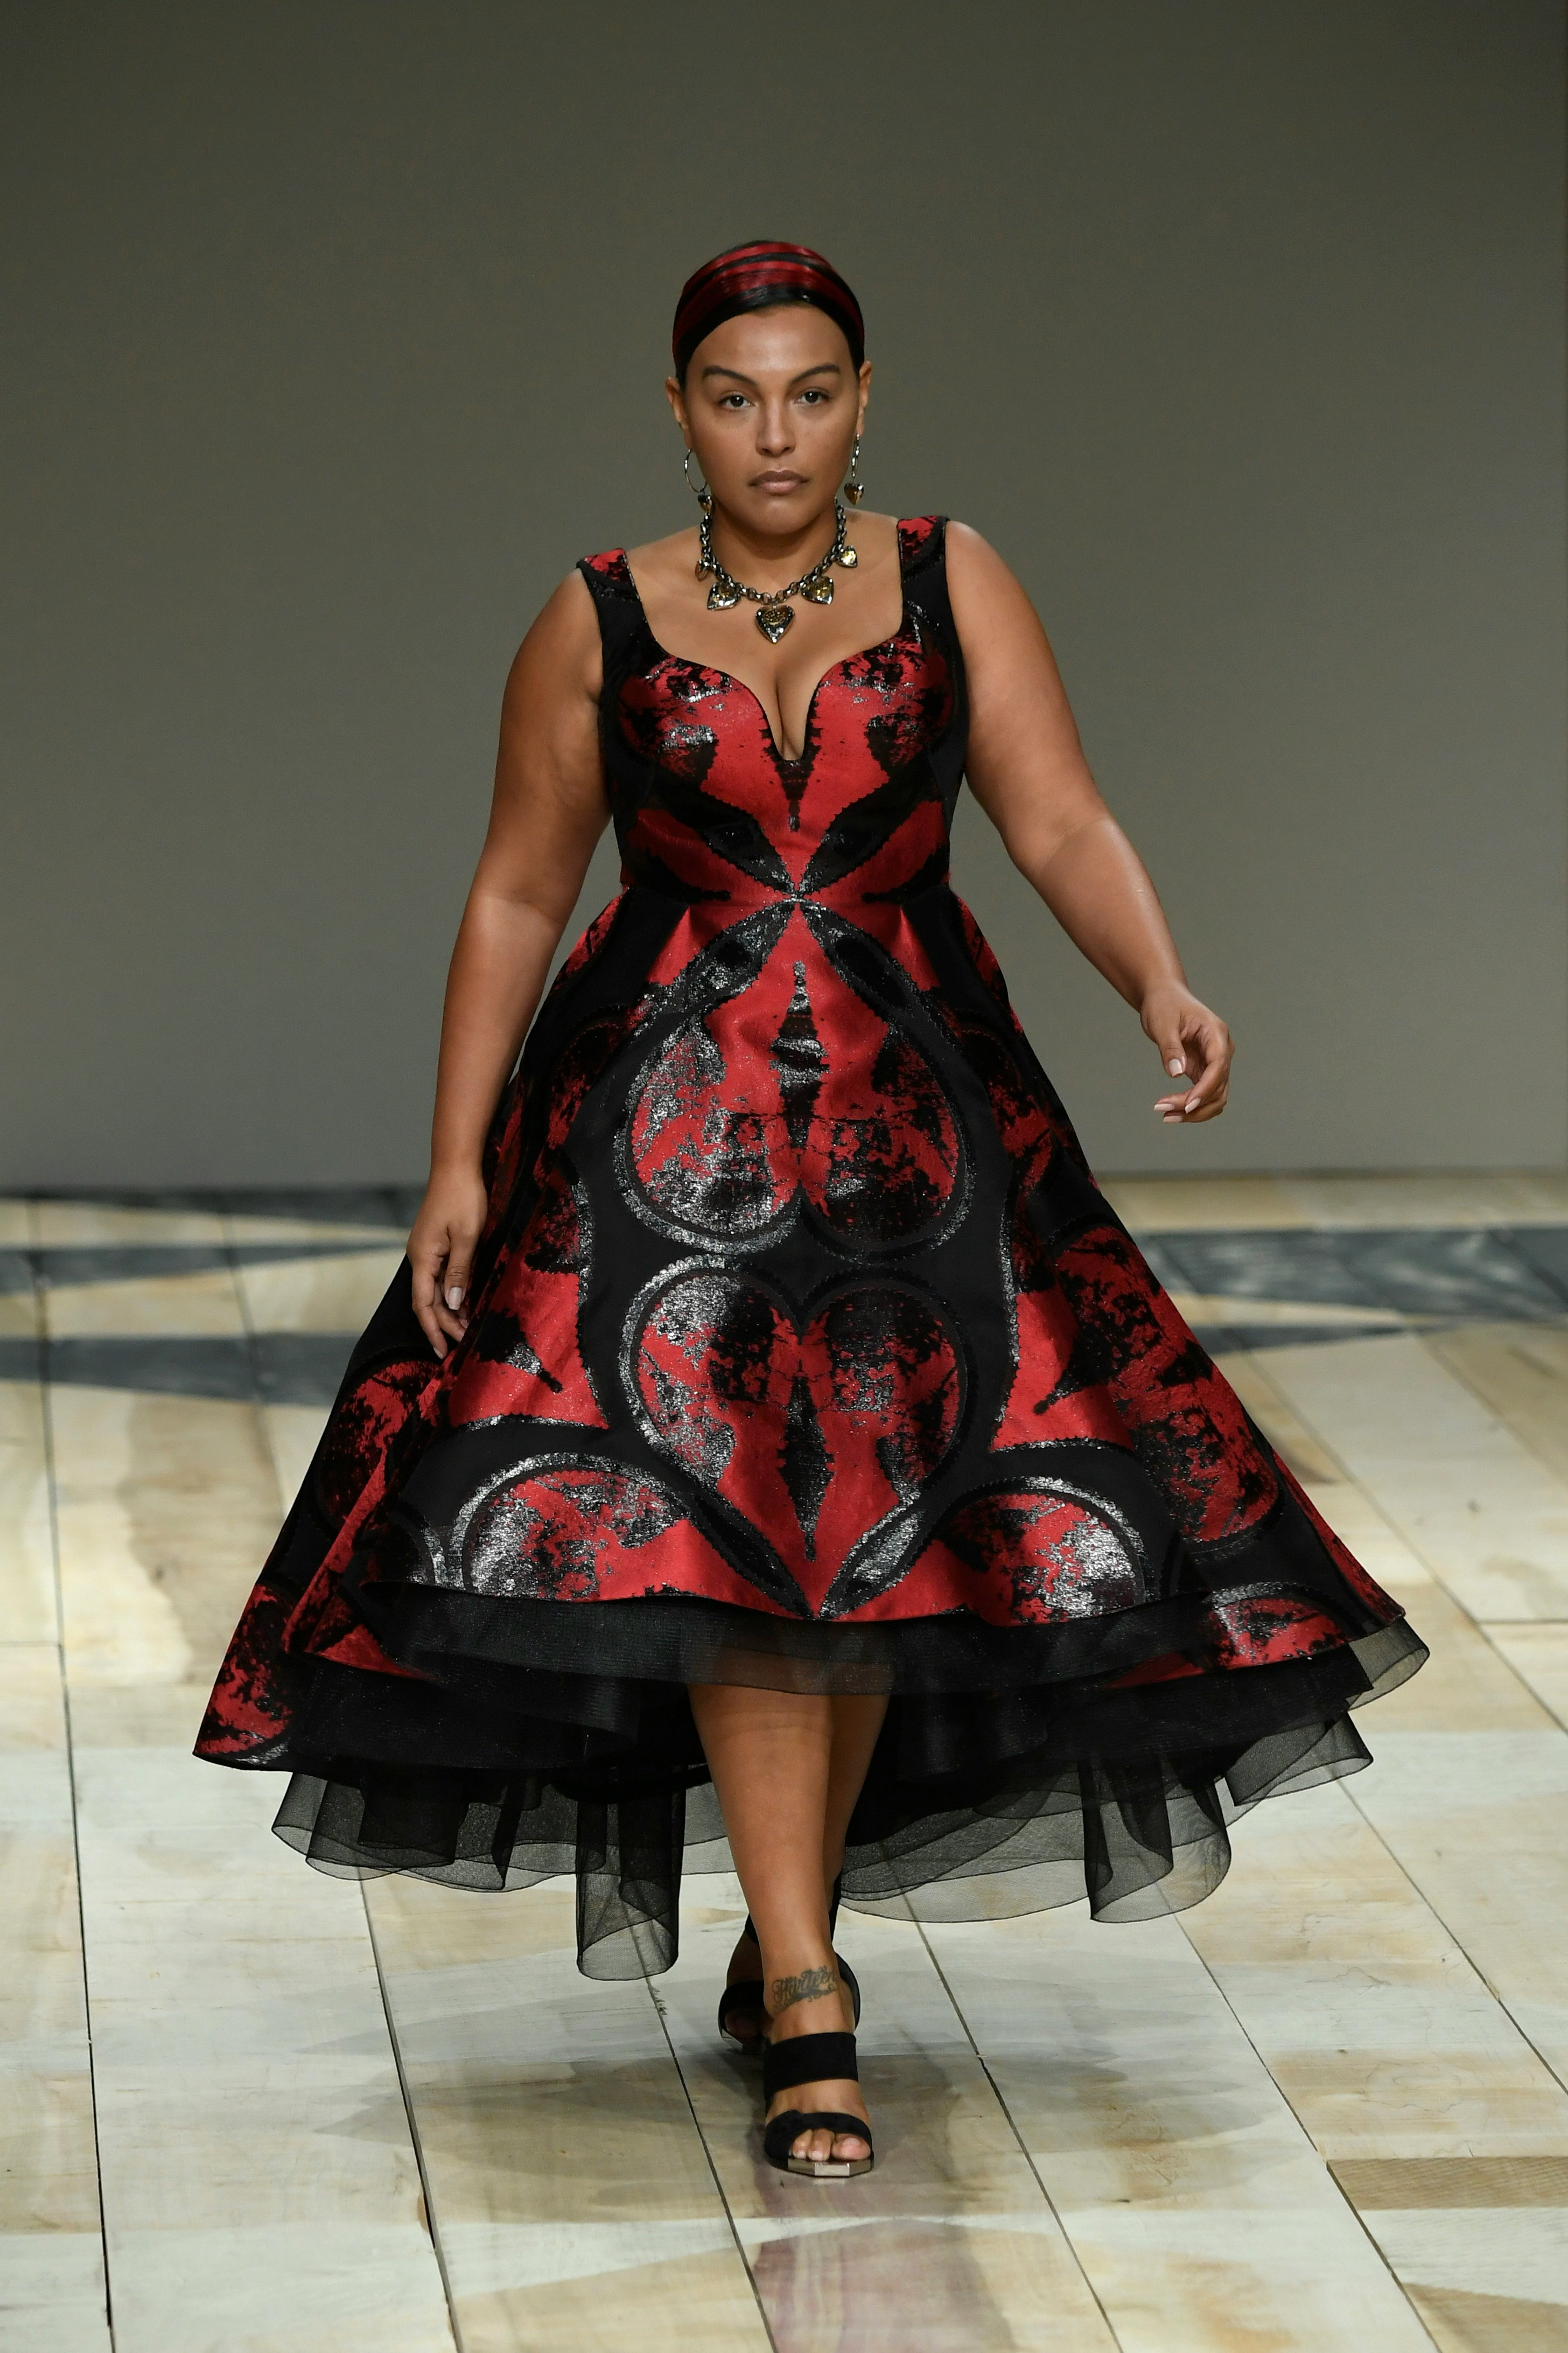 Fall 2020 Show Featured 2 Plus Size Models